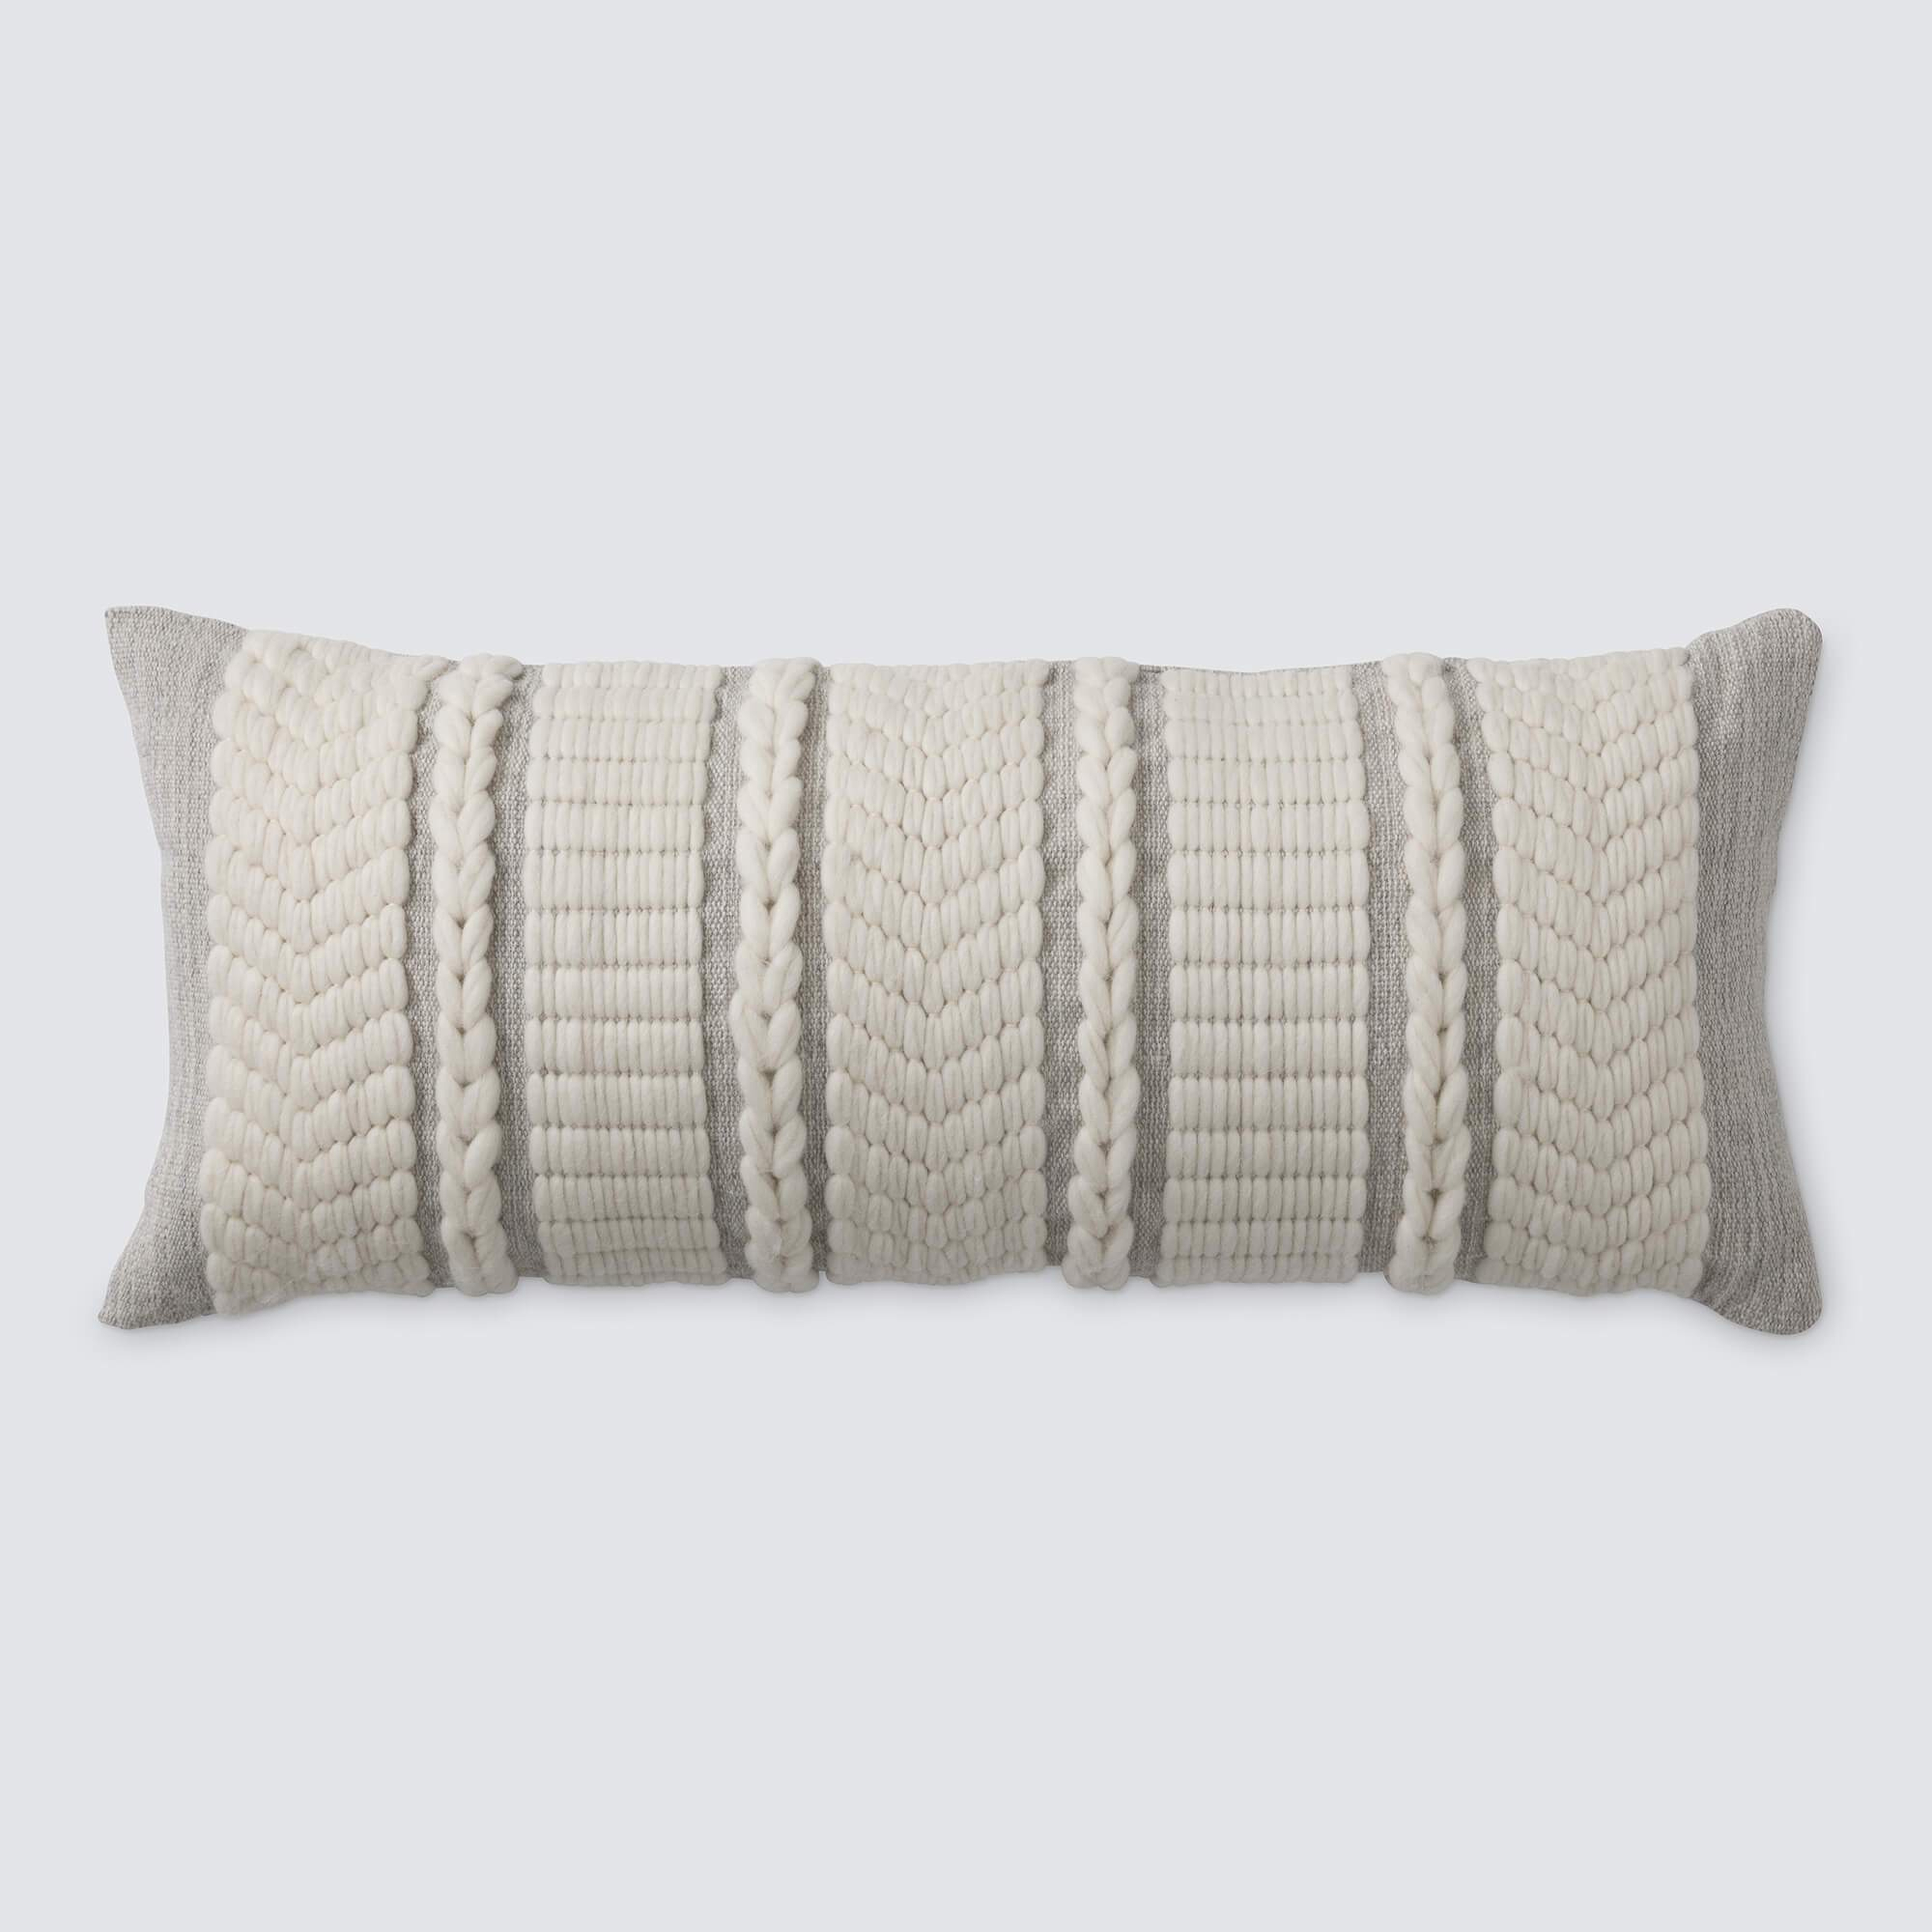 Invierno Lumbar Pillow By The Citizenry - The Citizenry